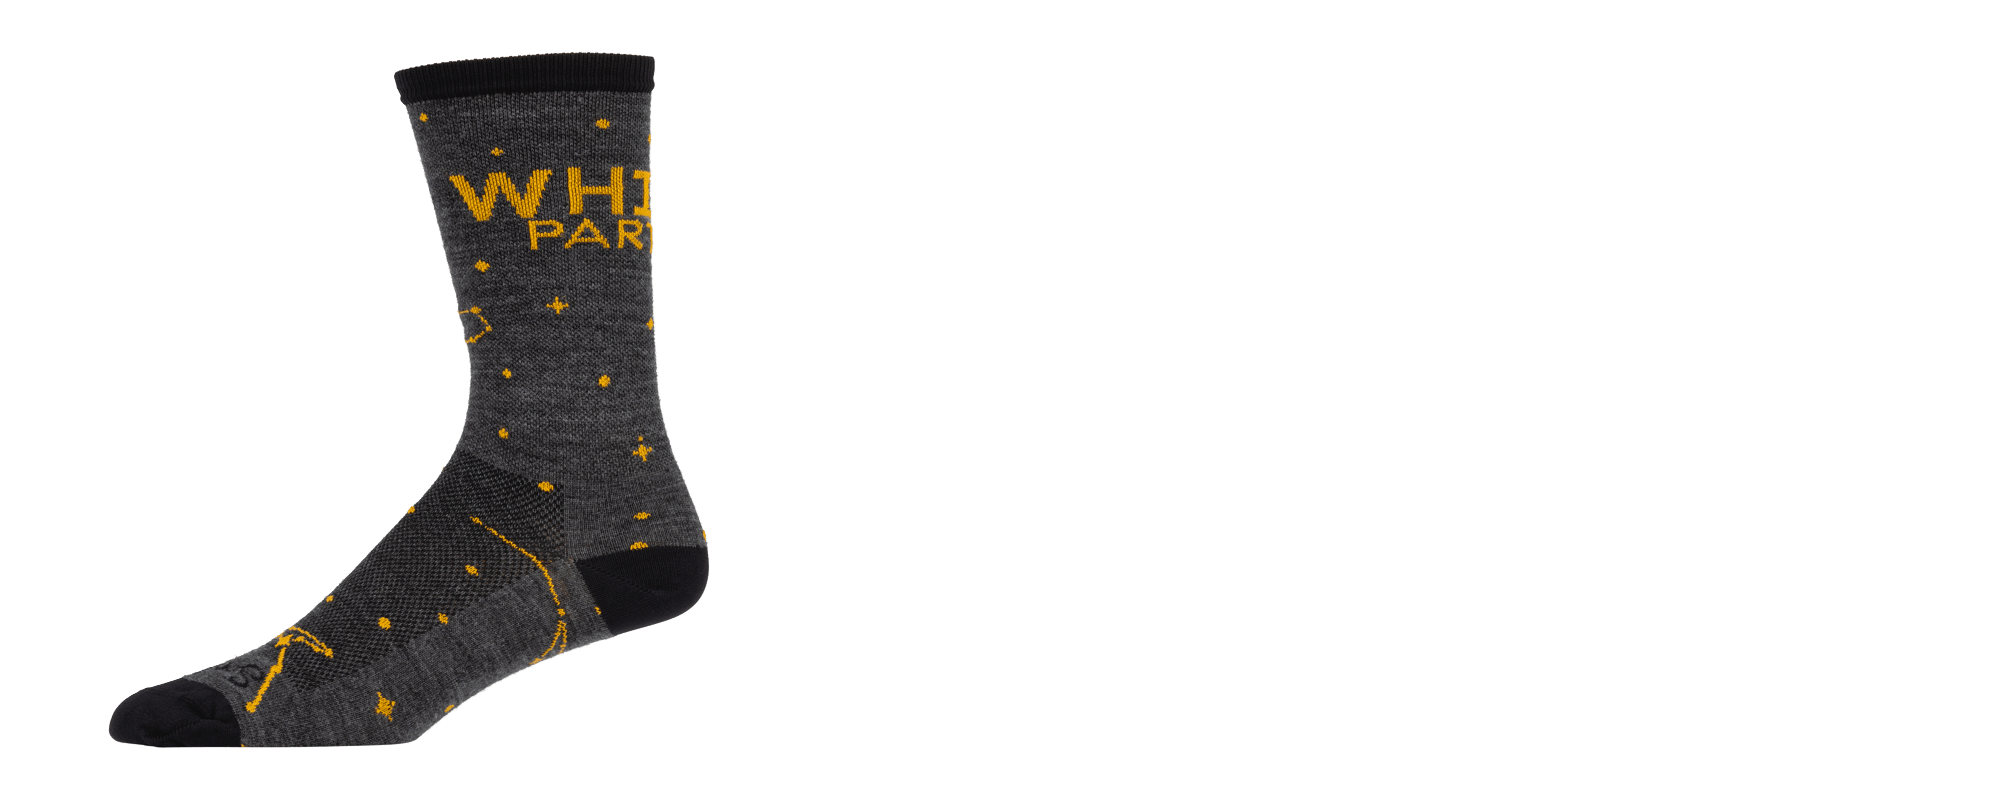 Whisky Stargazer Cycling Socks - Grey and Yellow - Inner side view 